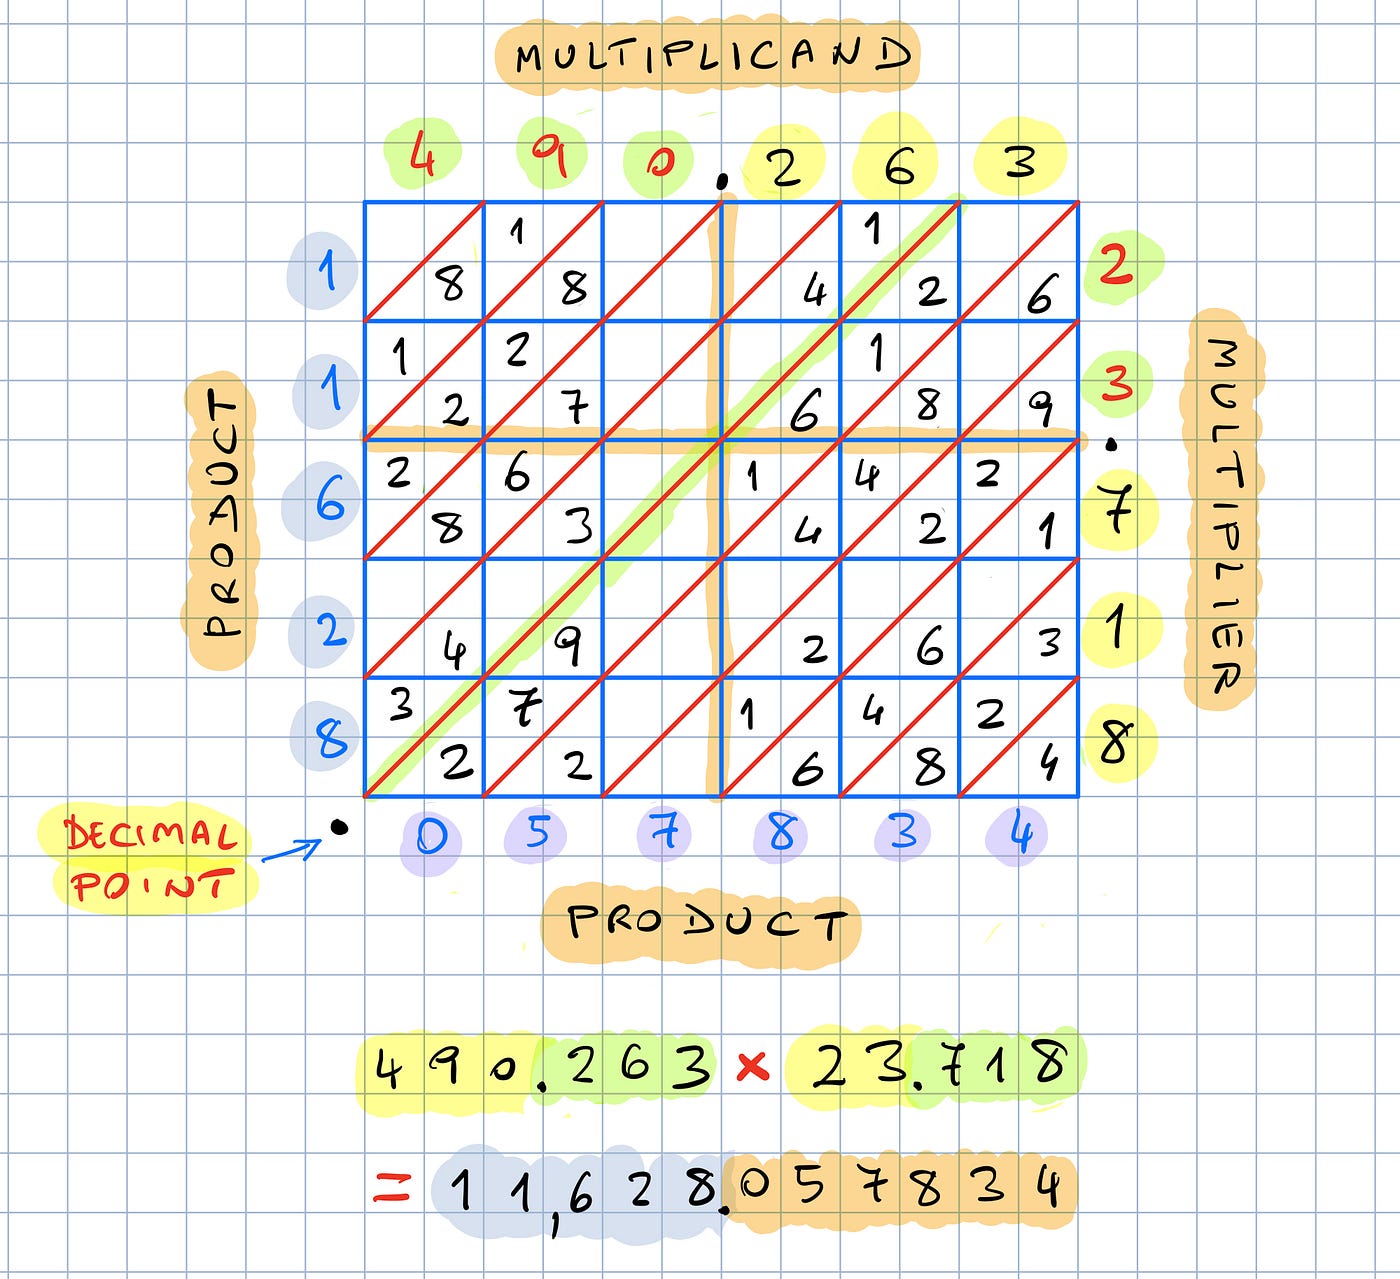 Proving the Pythagorean Theorem. Some algebraic and geometric proofs of…, by Michele Diodati, Not Zero